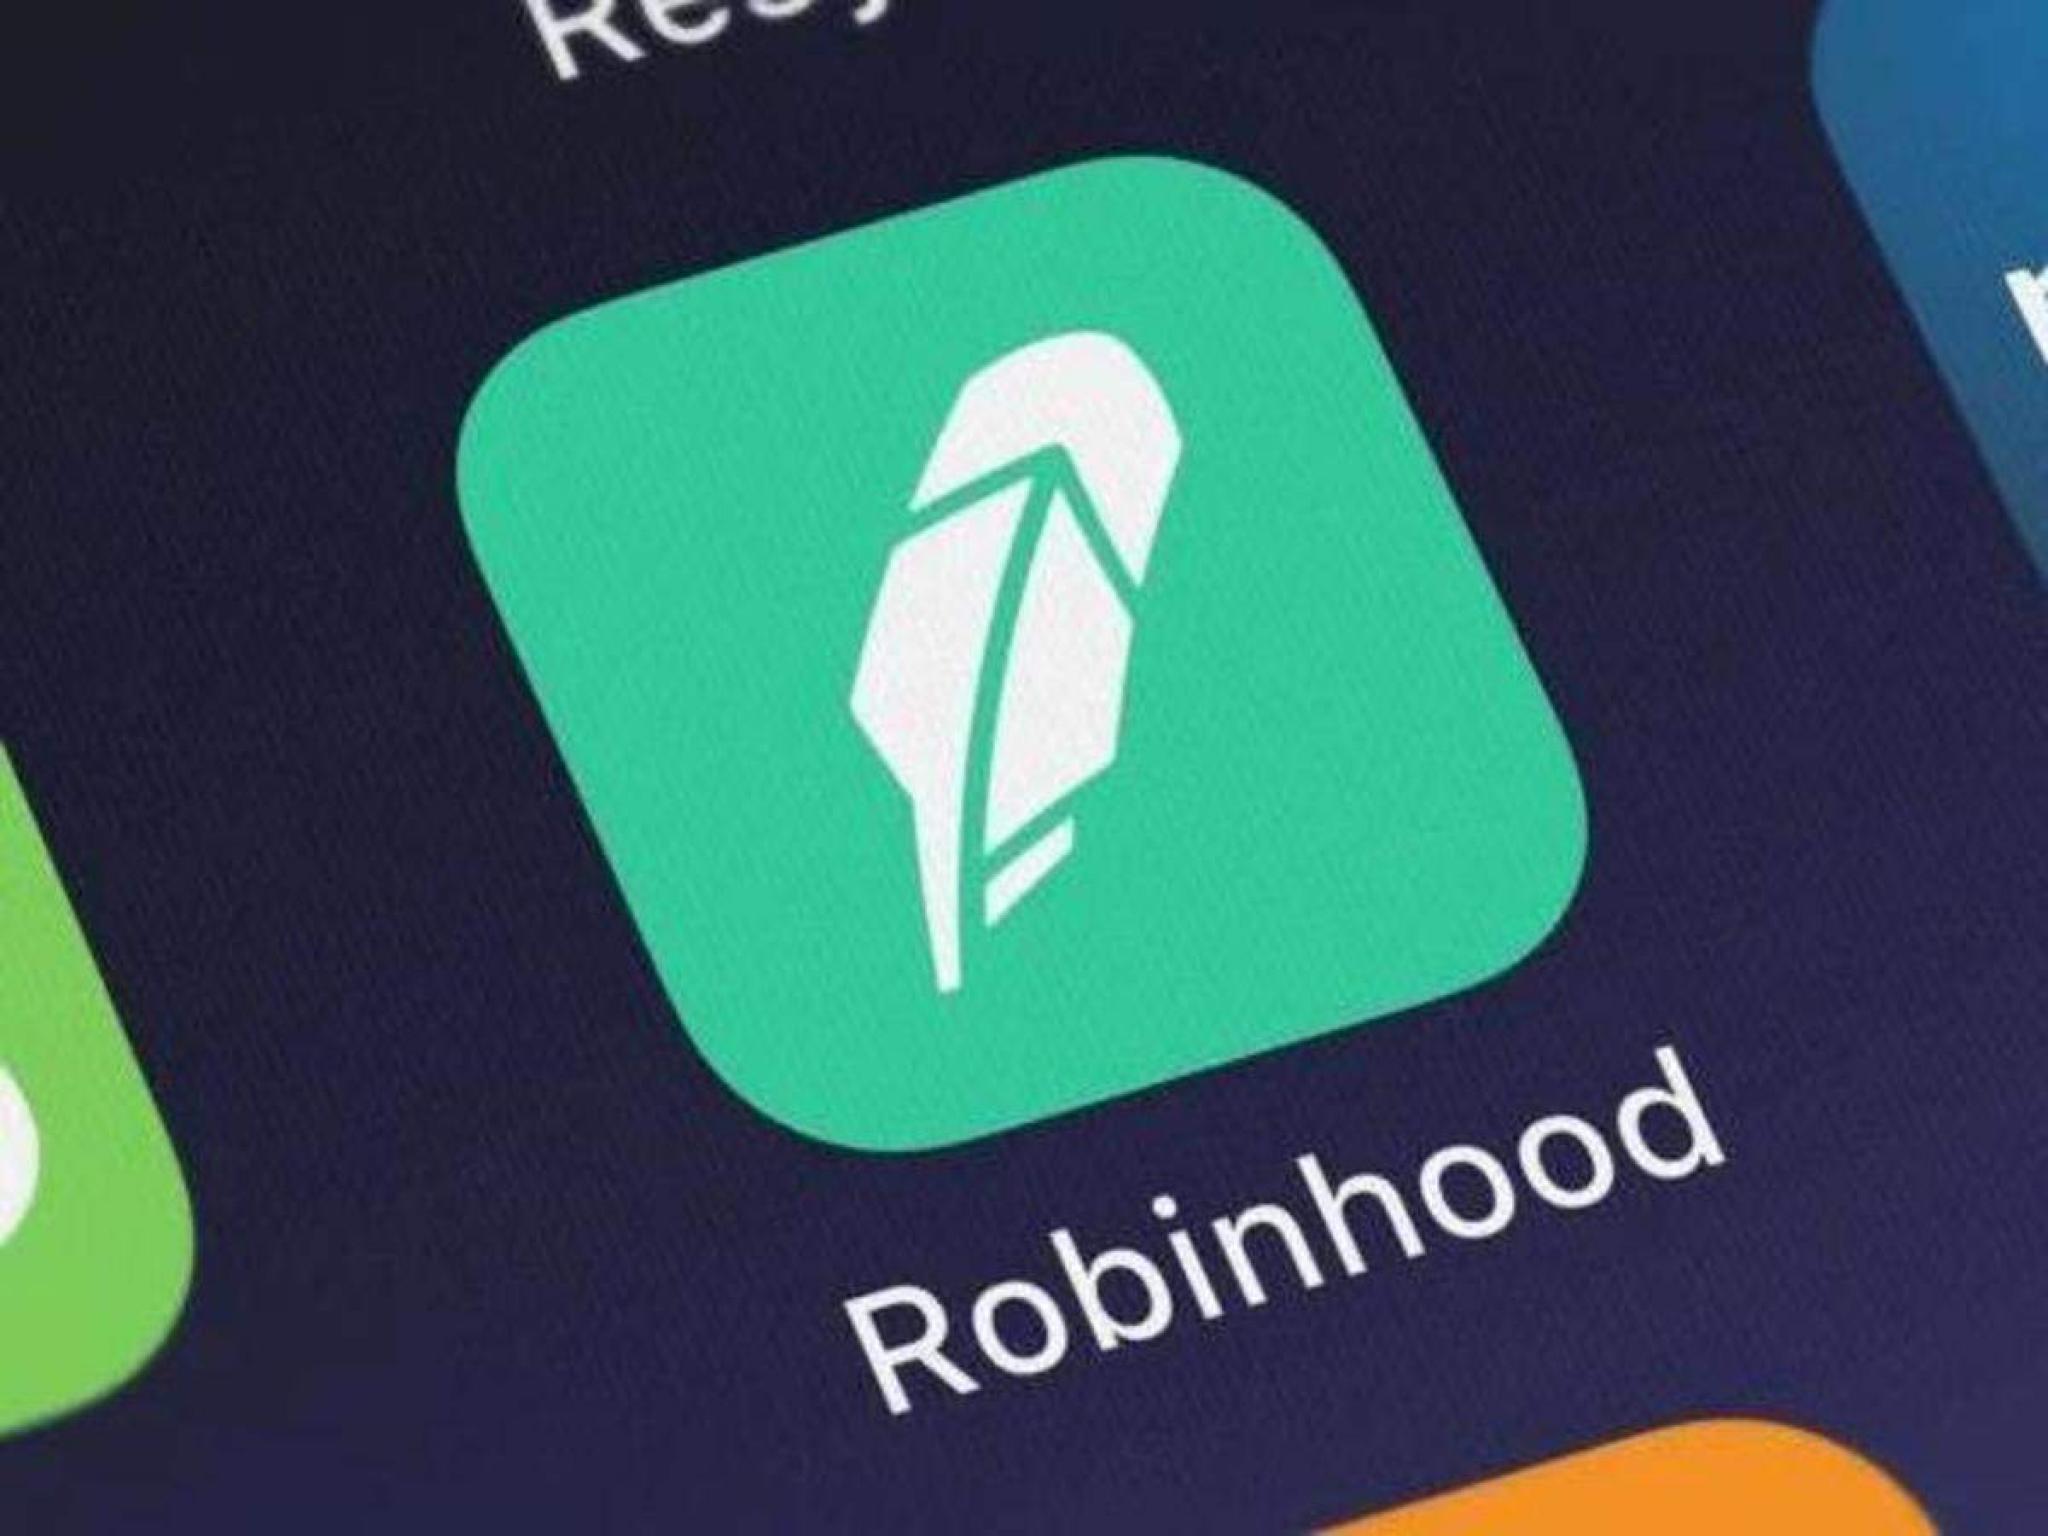  robinhood-microstrategy-and-other-big-losers-from-wednesday 